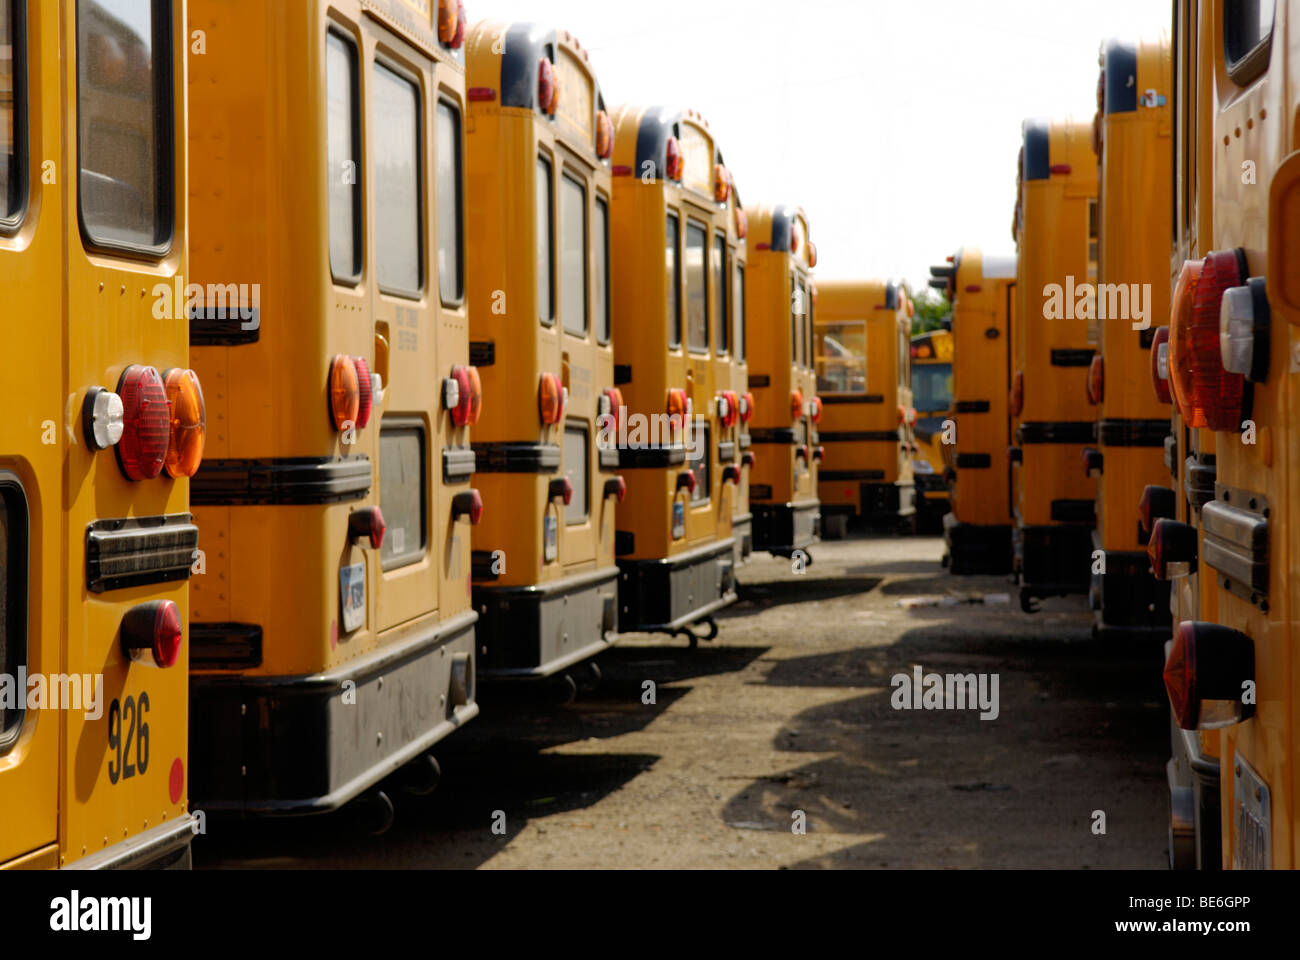 School buses parked in a depot Stock Photo